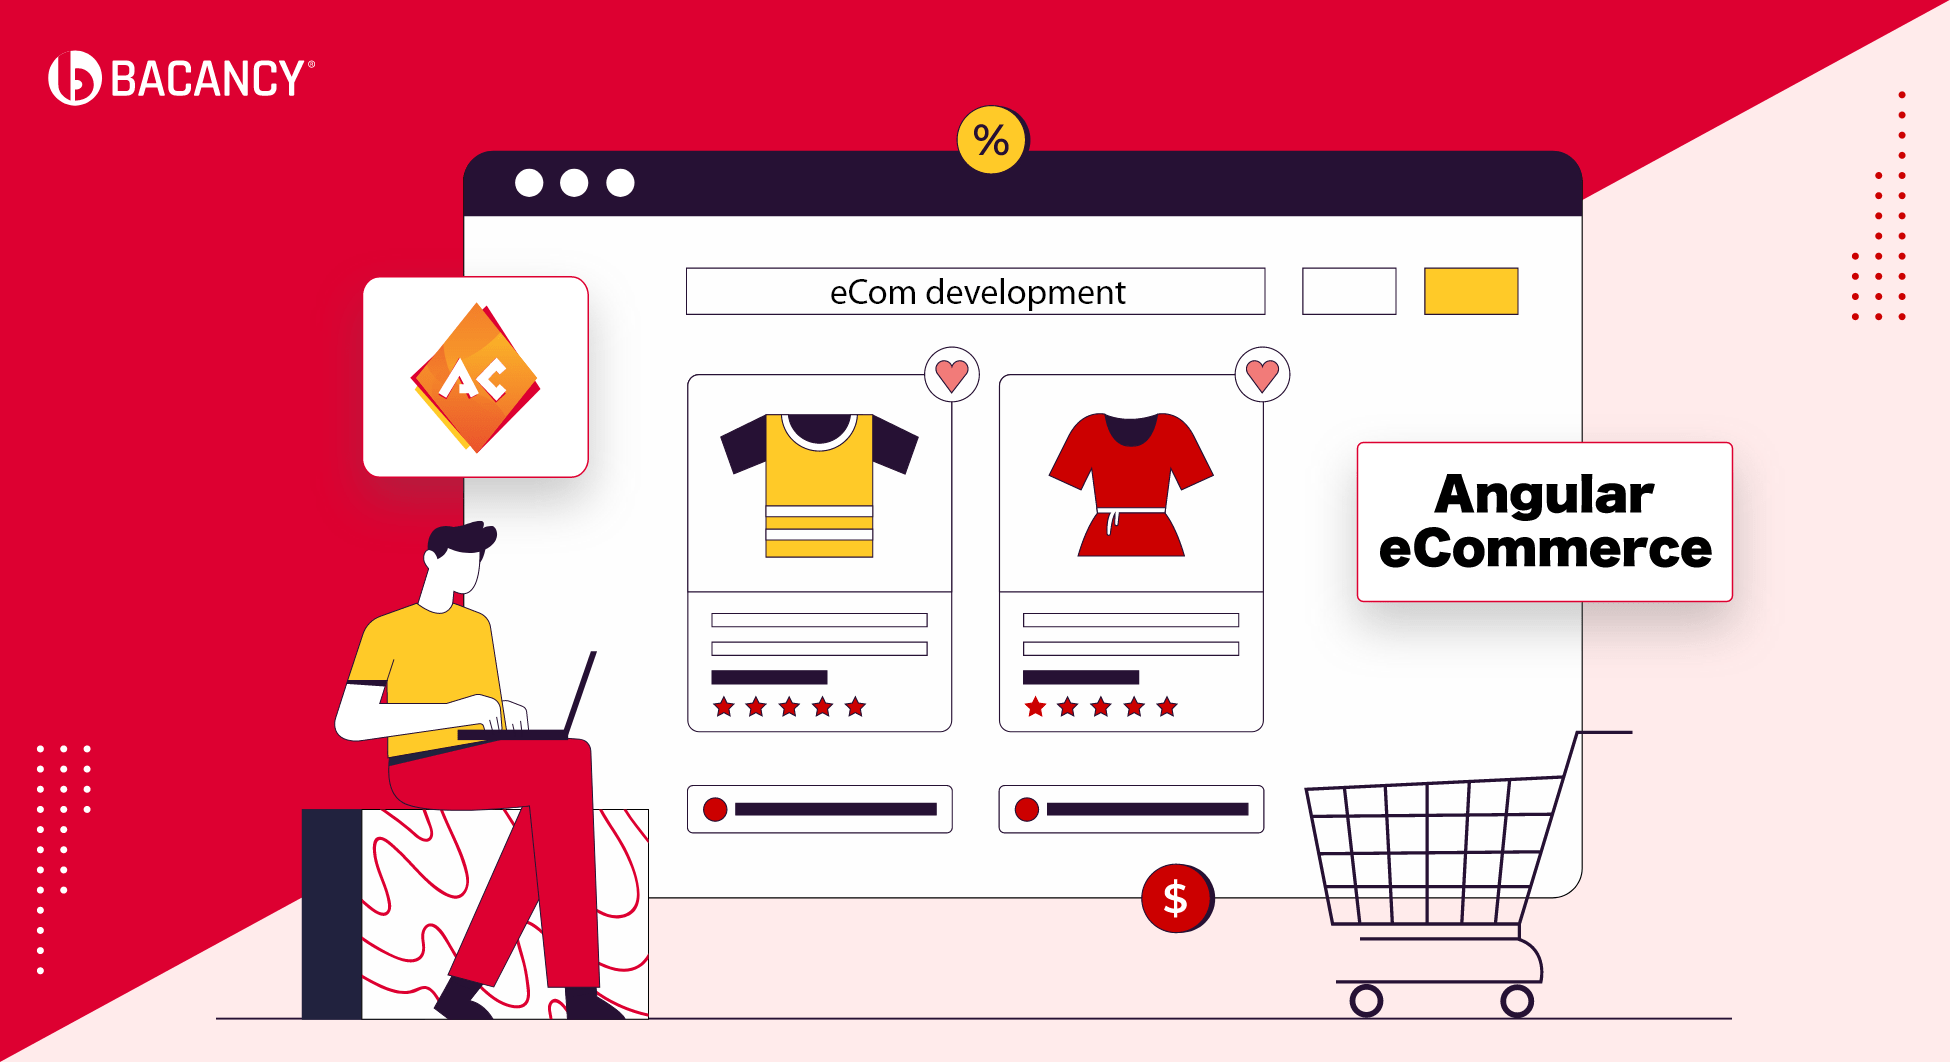 Why Angular eCommerce is perfect for Web App Development?